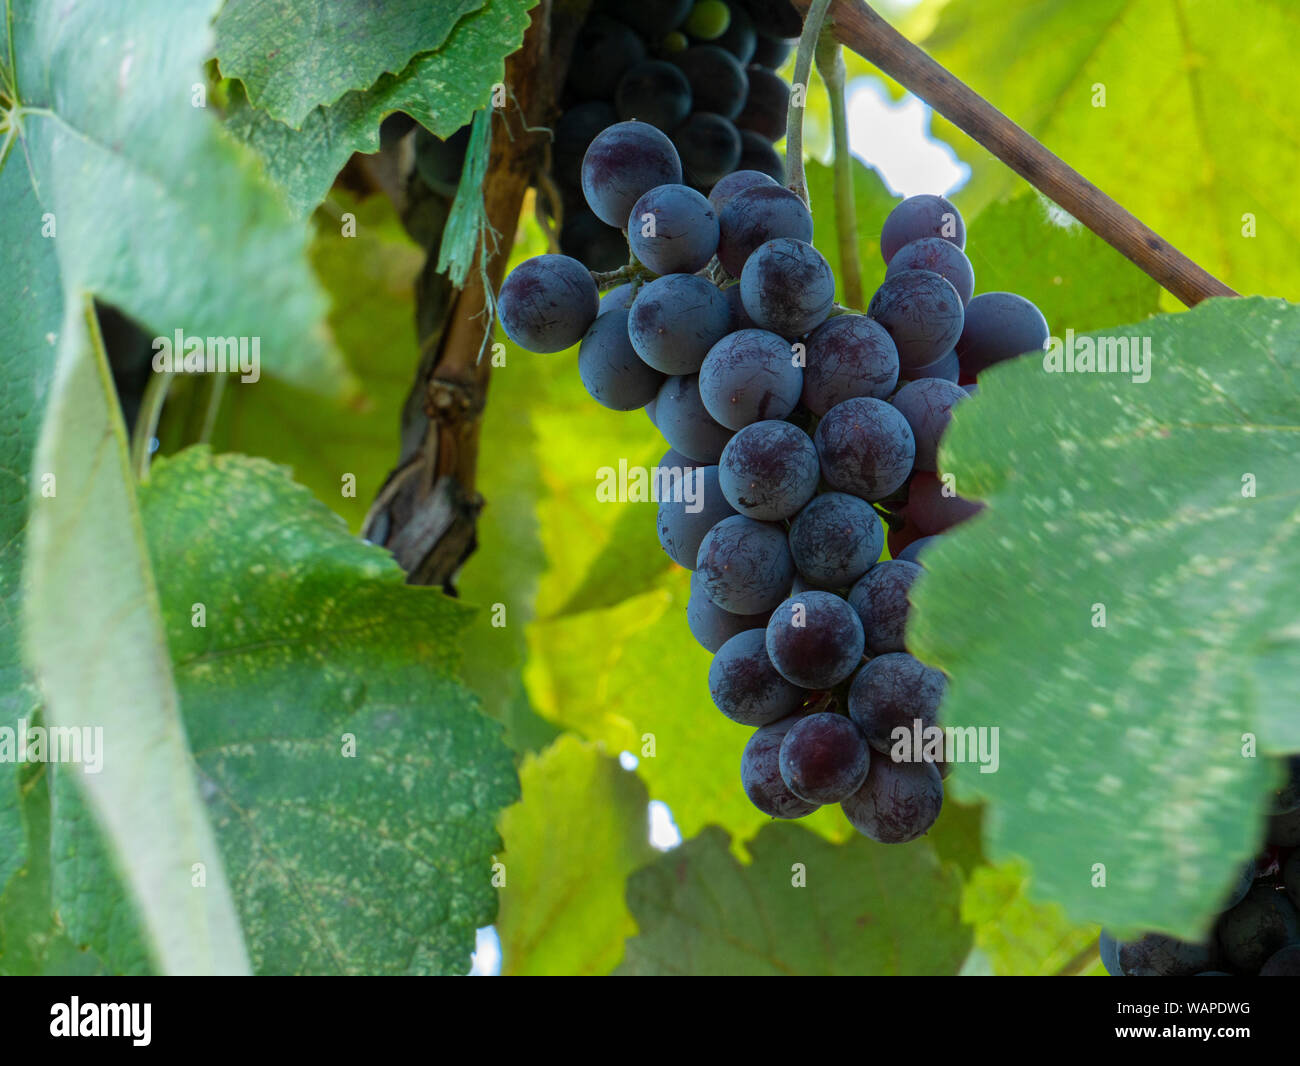 Bunches of grapes in a vineyard in a rural garden. Stock Photo